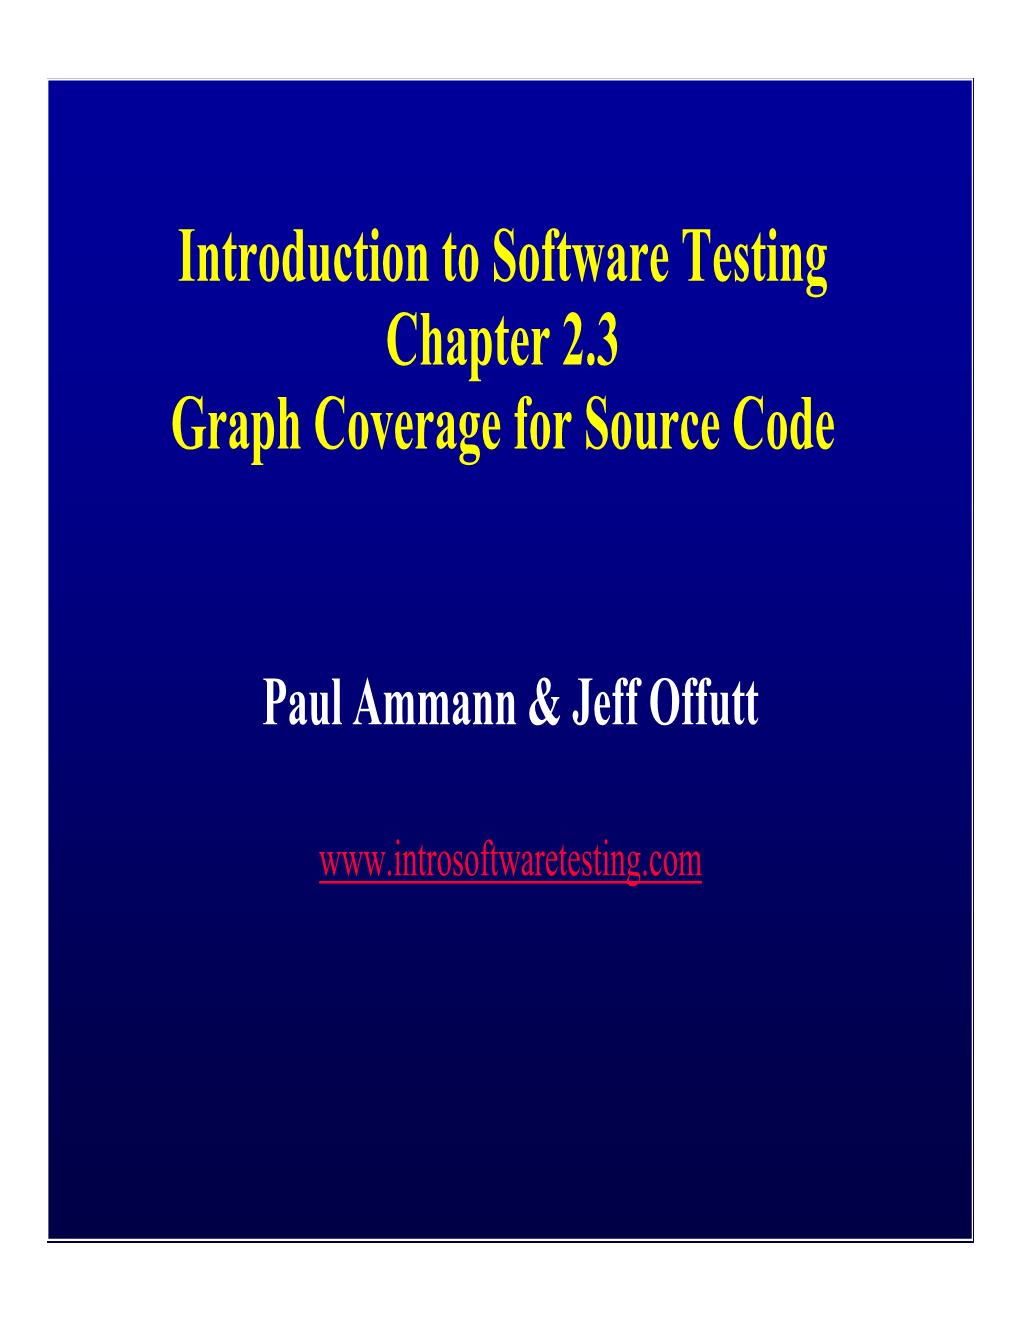 Introduction to Software Testing Chapter 2.3 Graph Coverage for Source Code